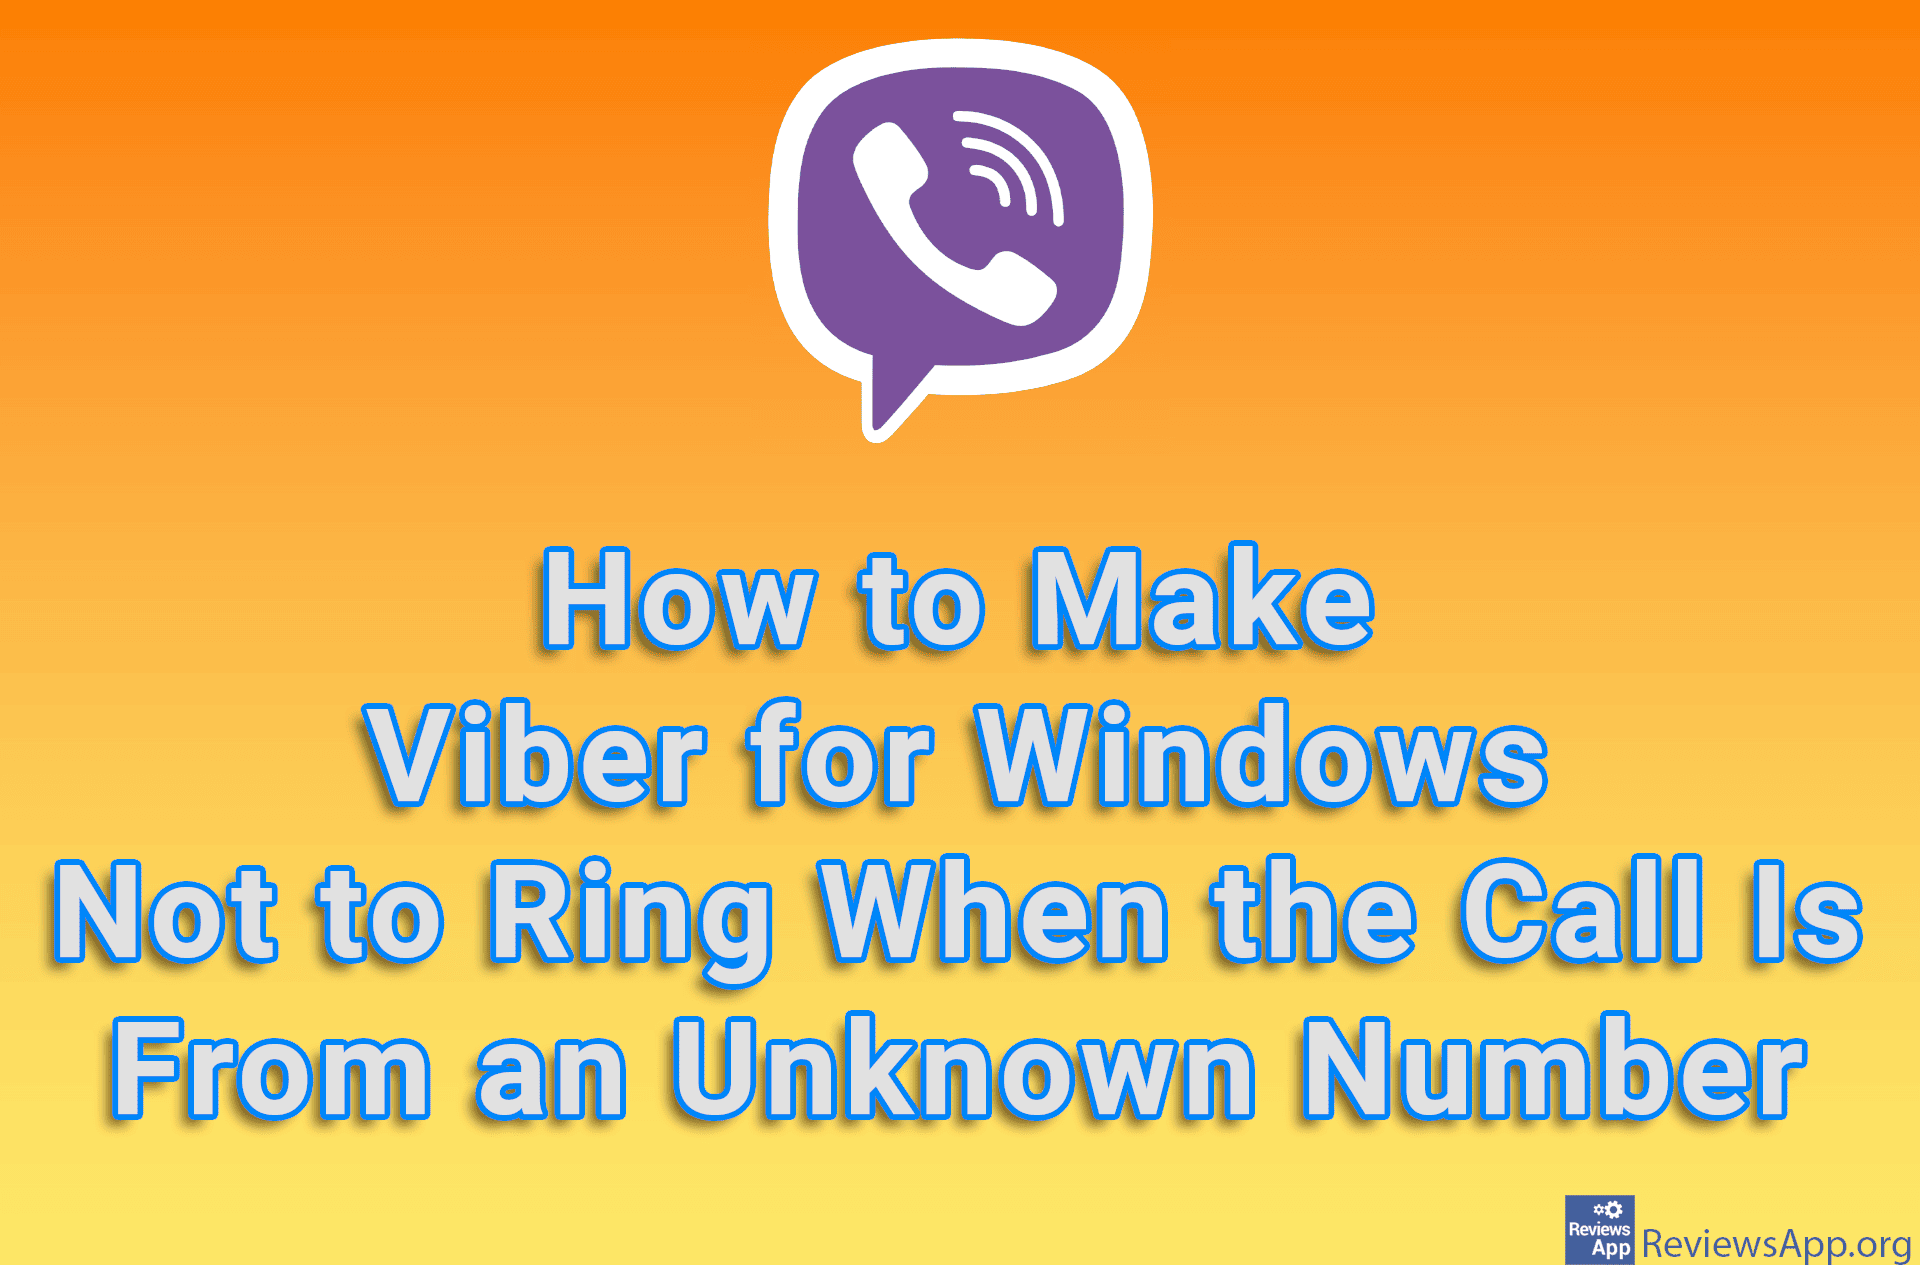 How to Make Viber for Windows Not to Ring When the Call Is From an Unknown Number